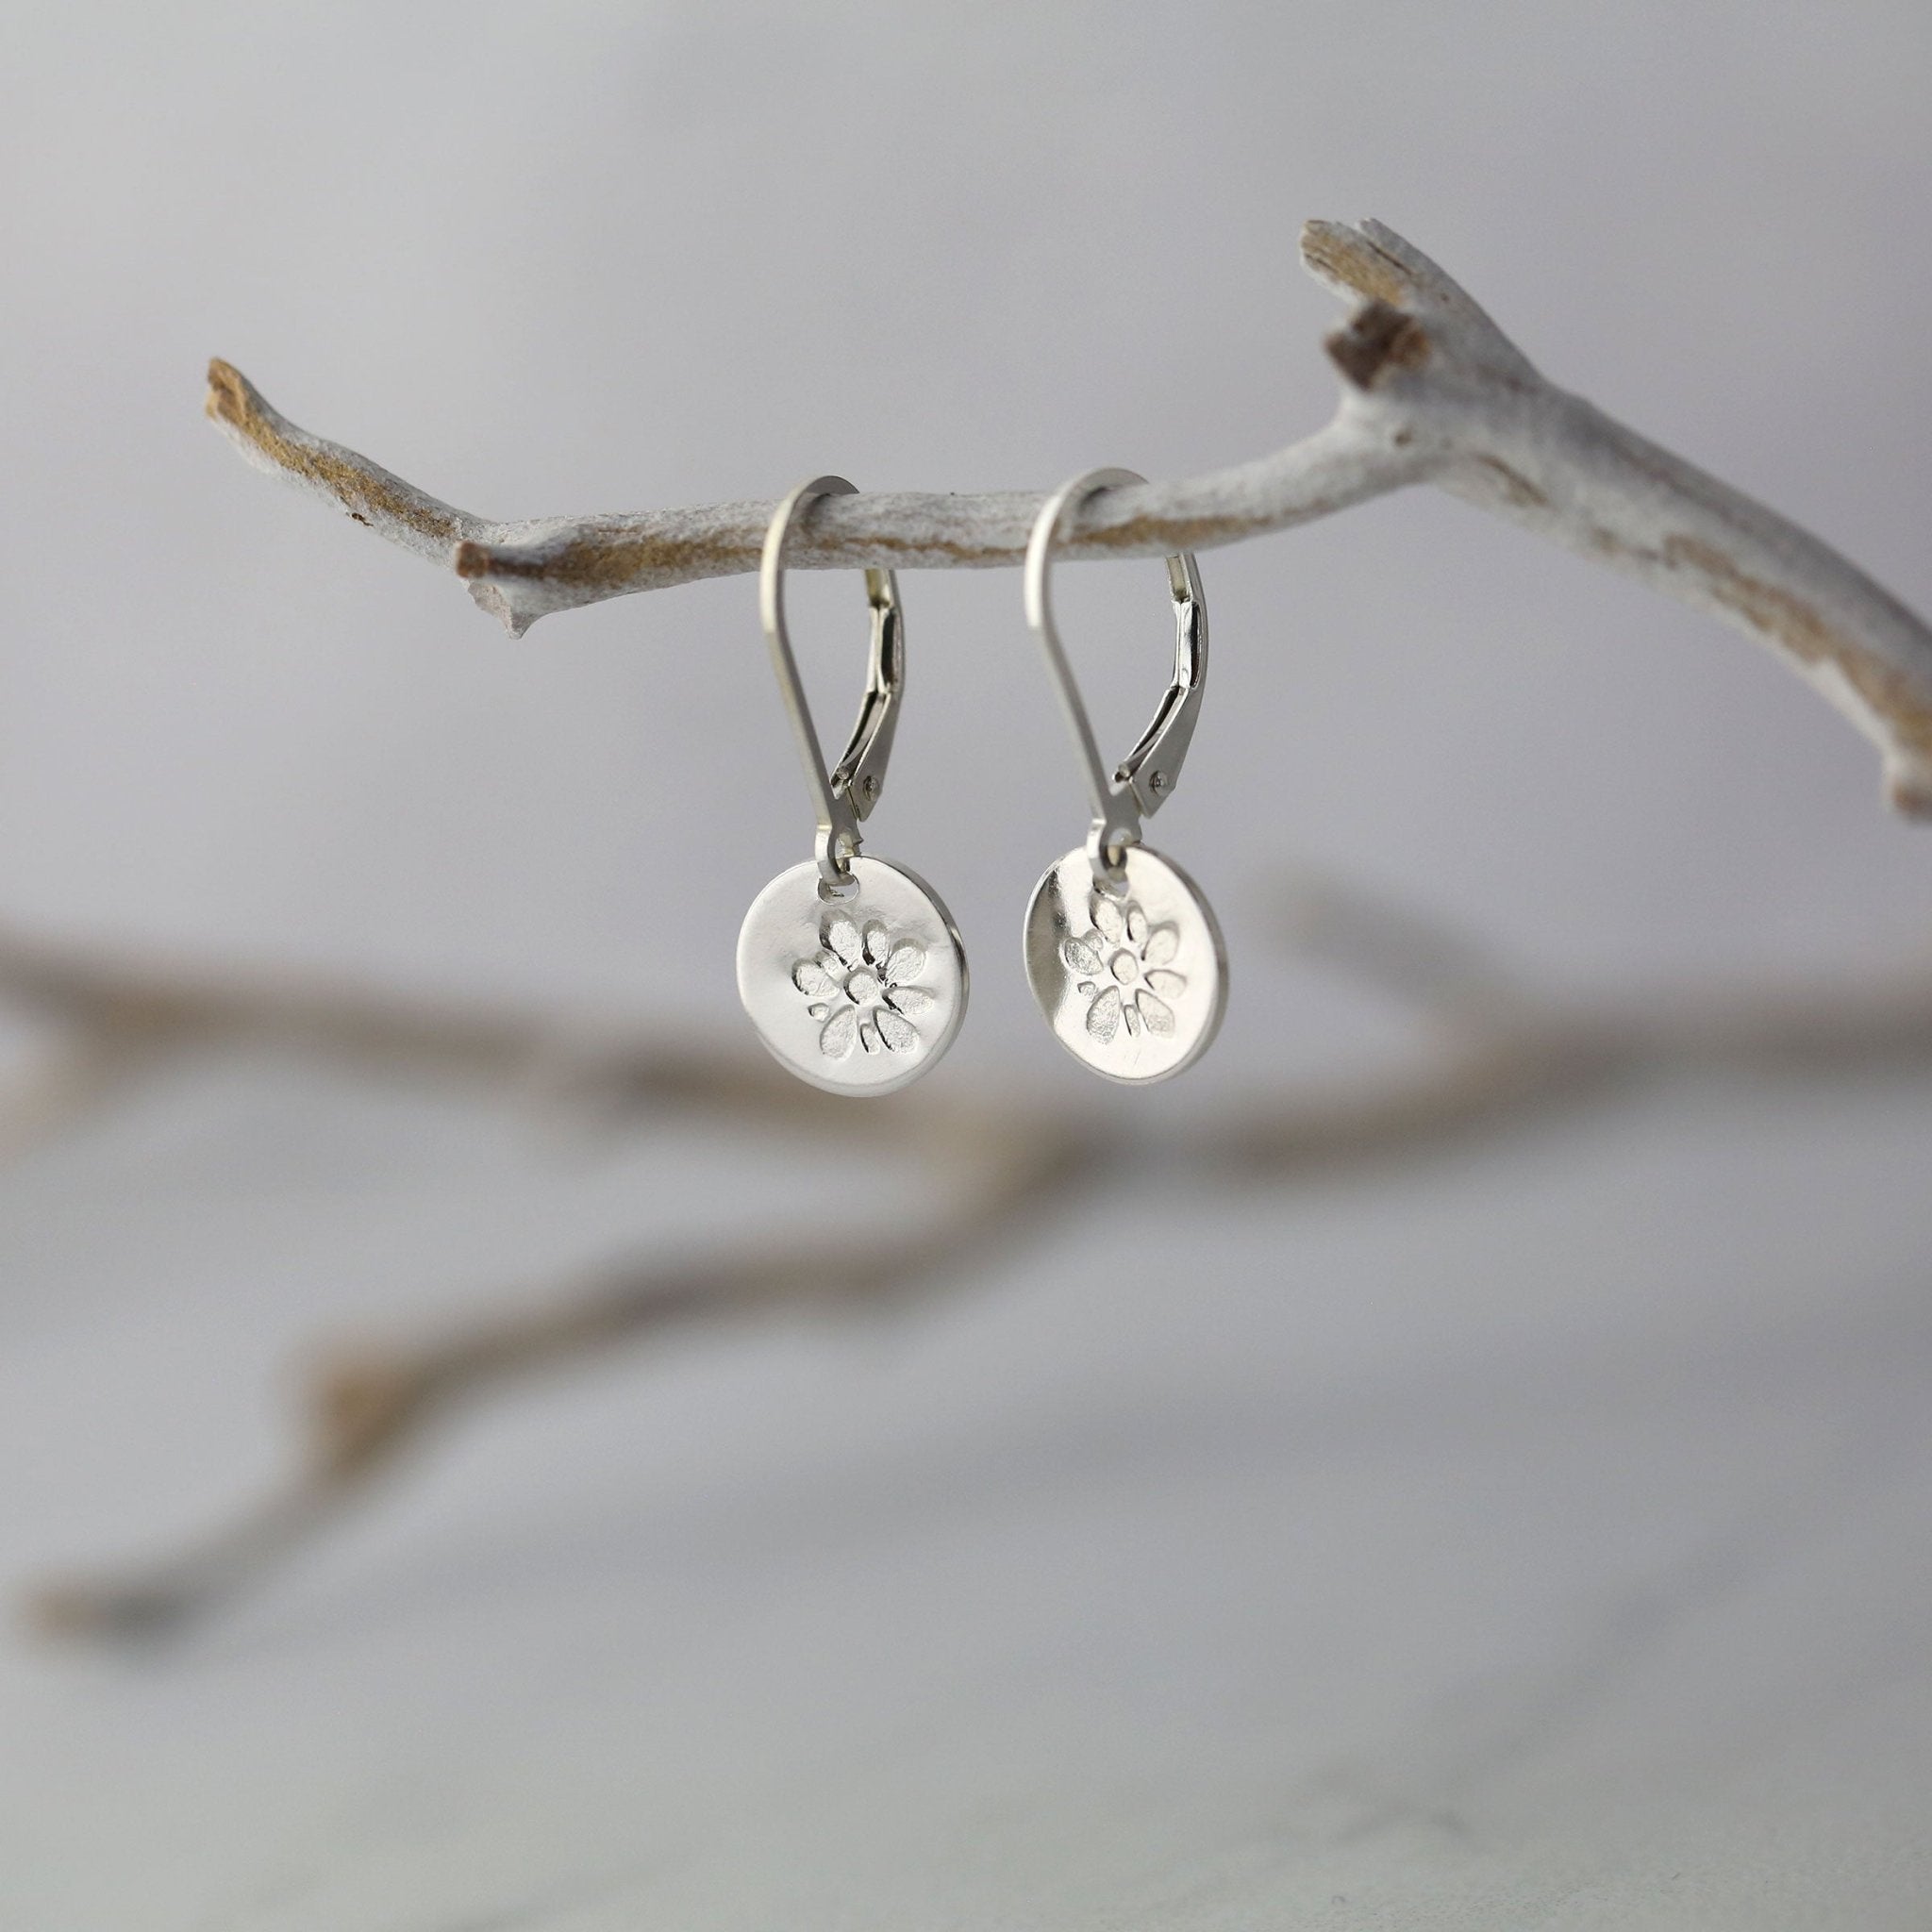 Silver Blossom Tiny Disc Earrings handmade by Burnish